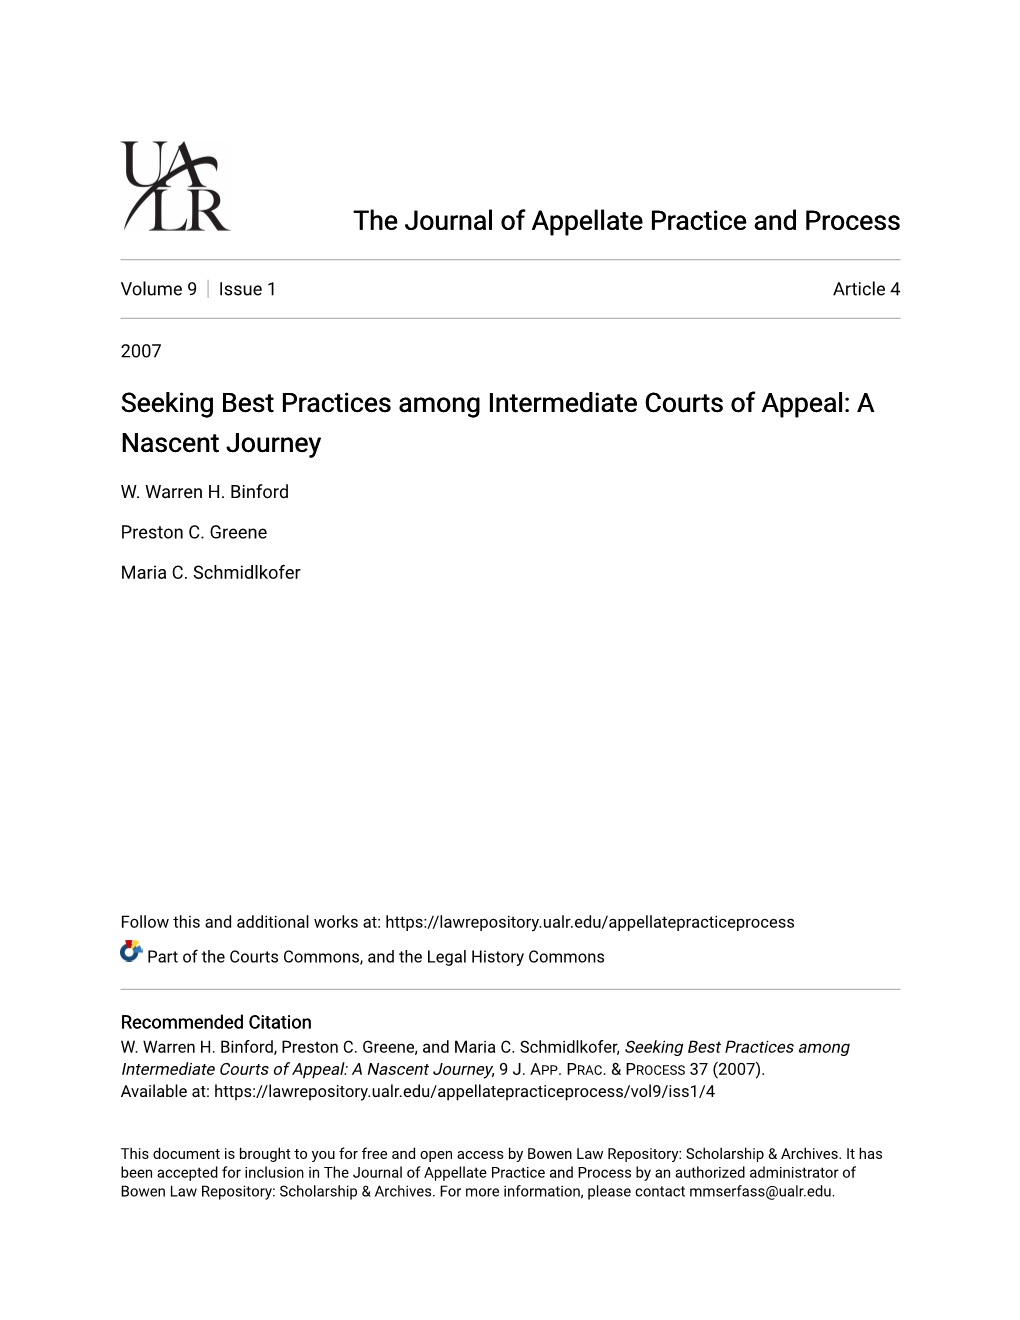 Seeking Best Practices Among Intermediate Courts of Appeal: a Nascent Journey